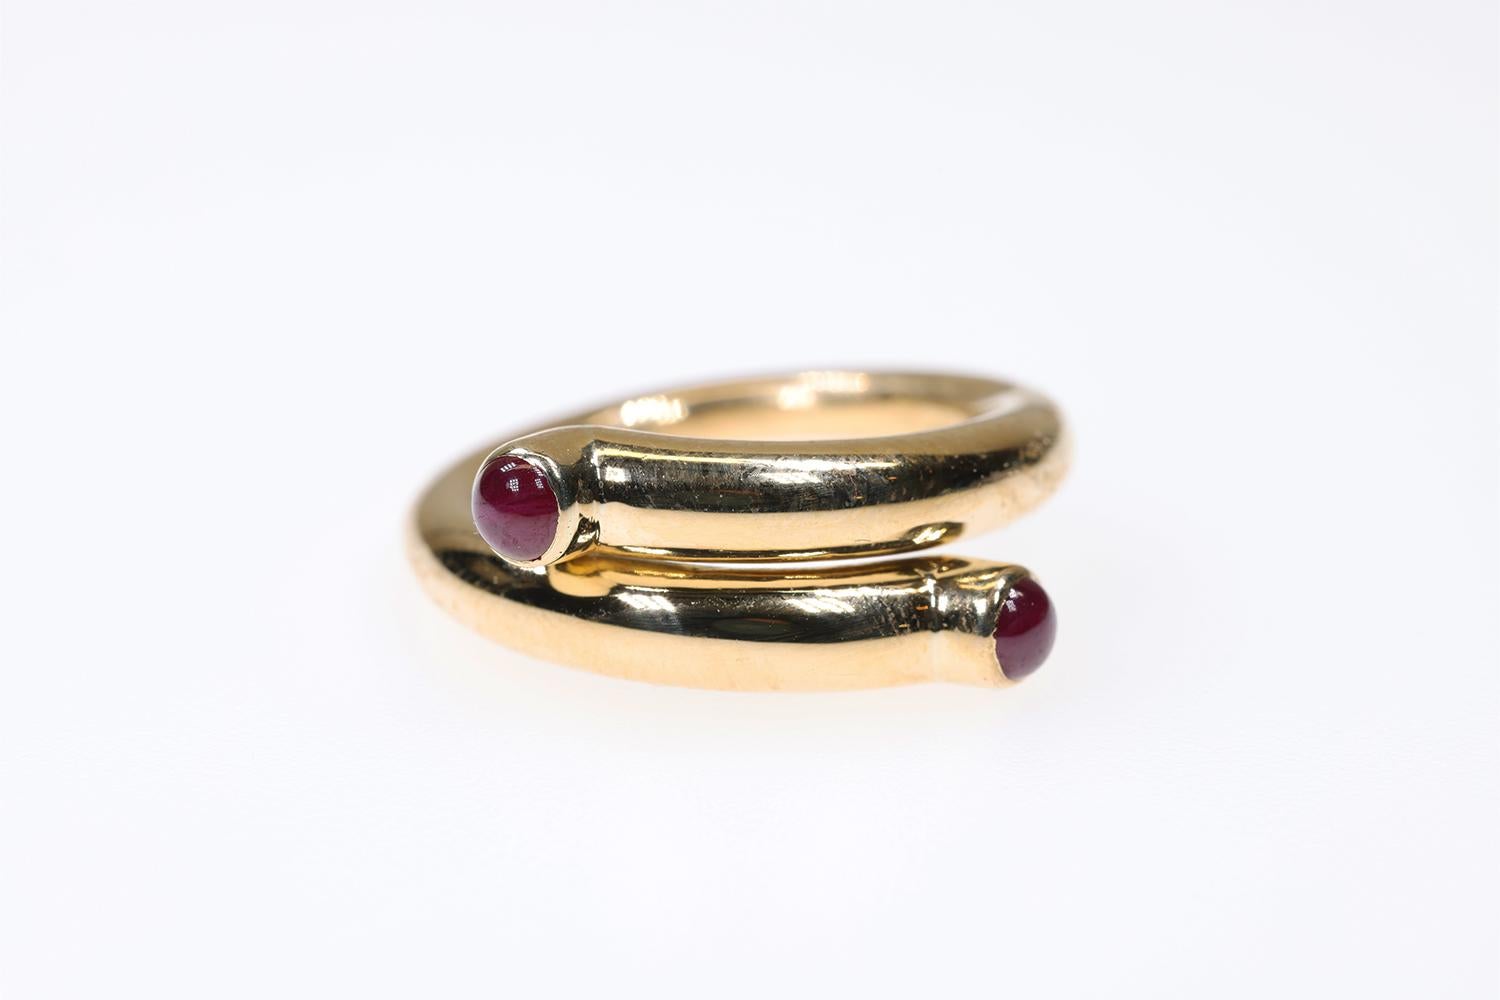 Designer ring by Tiffany & Co, Jean Schlumberger, 18k gold with Ruby Cabochons. A classic iconic piece of jewelry that is timeless in its design and fabrication. Made by Tiffany & Co this ring features the best of everything and is a true collector